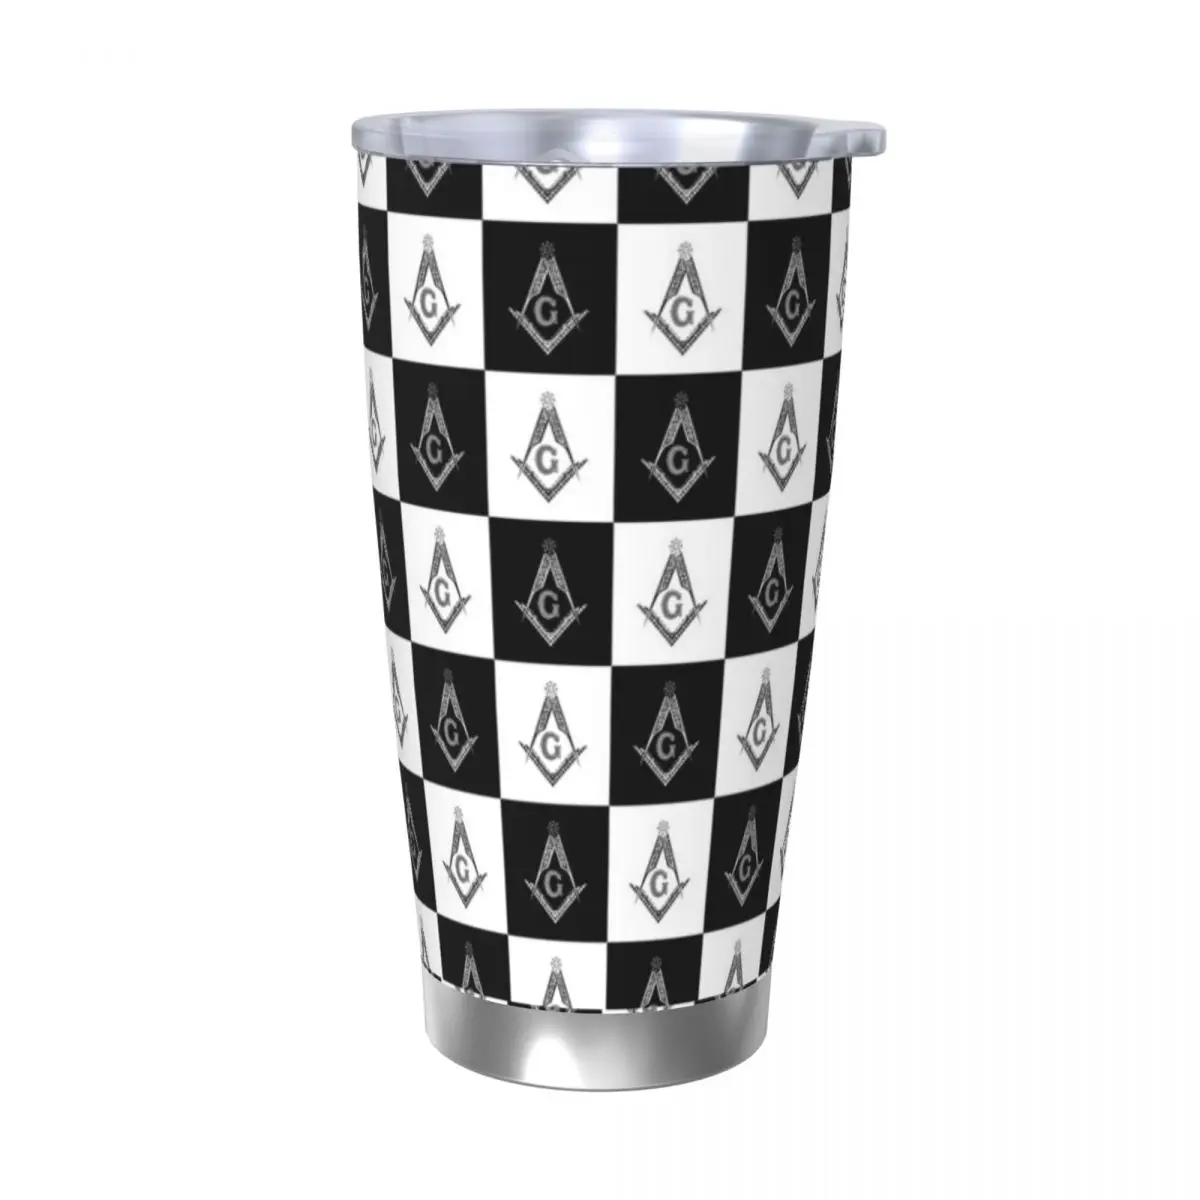 

Freemason Checkered Insulated Tumbler with Straws Lid Masonic Stainless Steel Coffee Mugs Double Wall Thermos Bottle Cups, 20oz